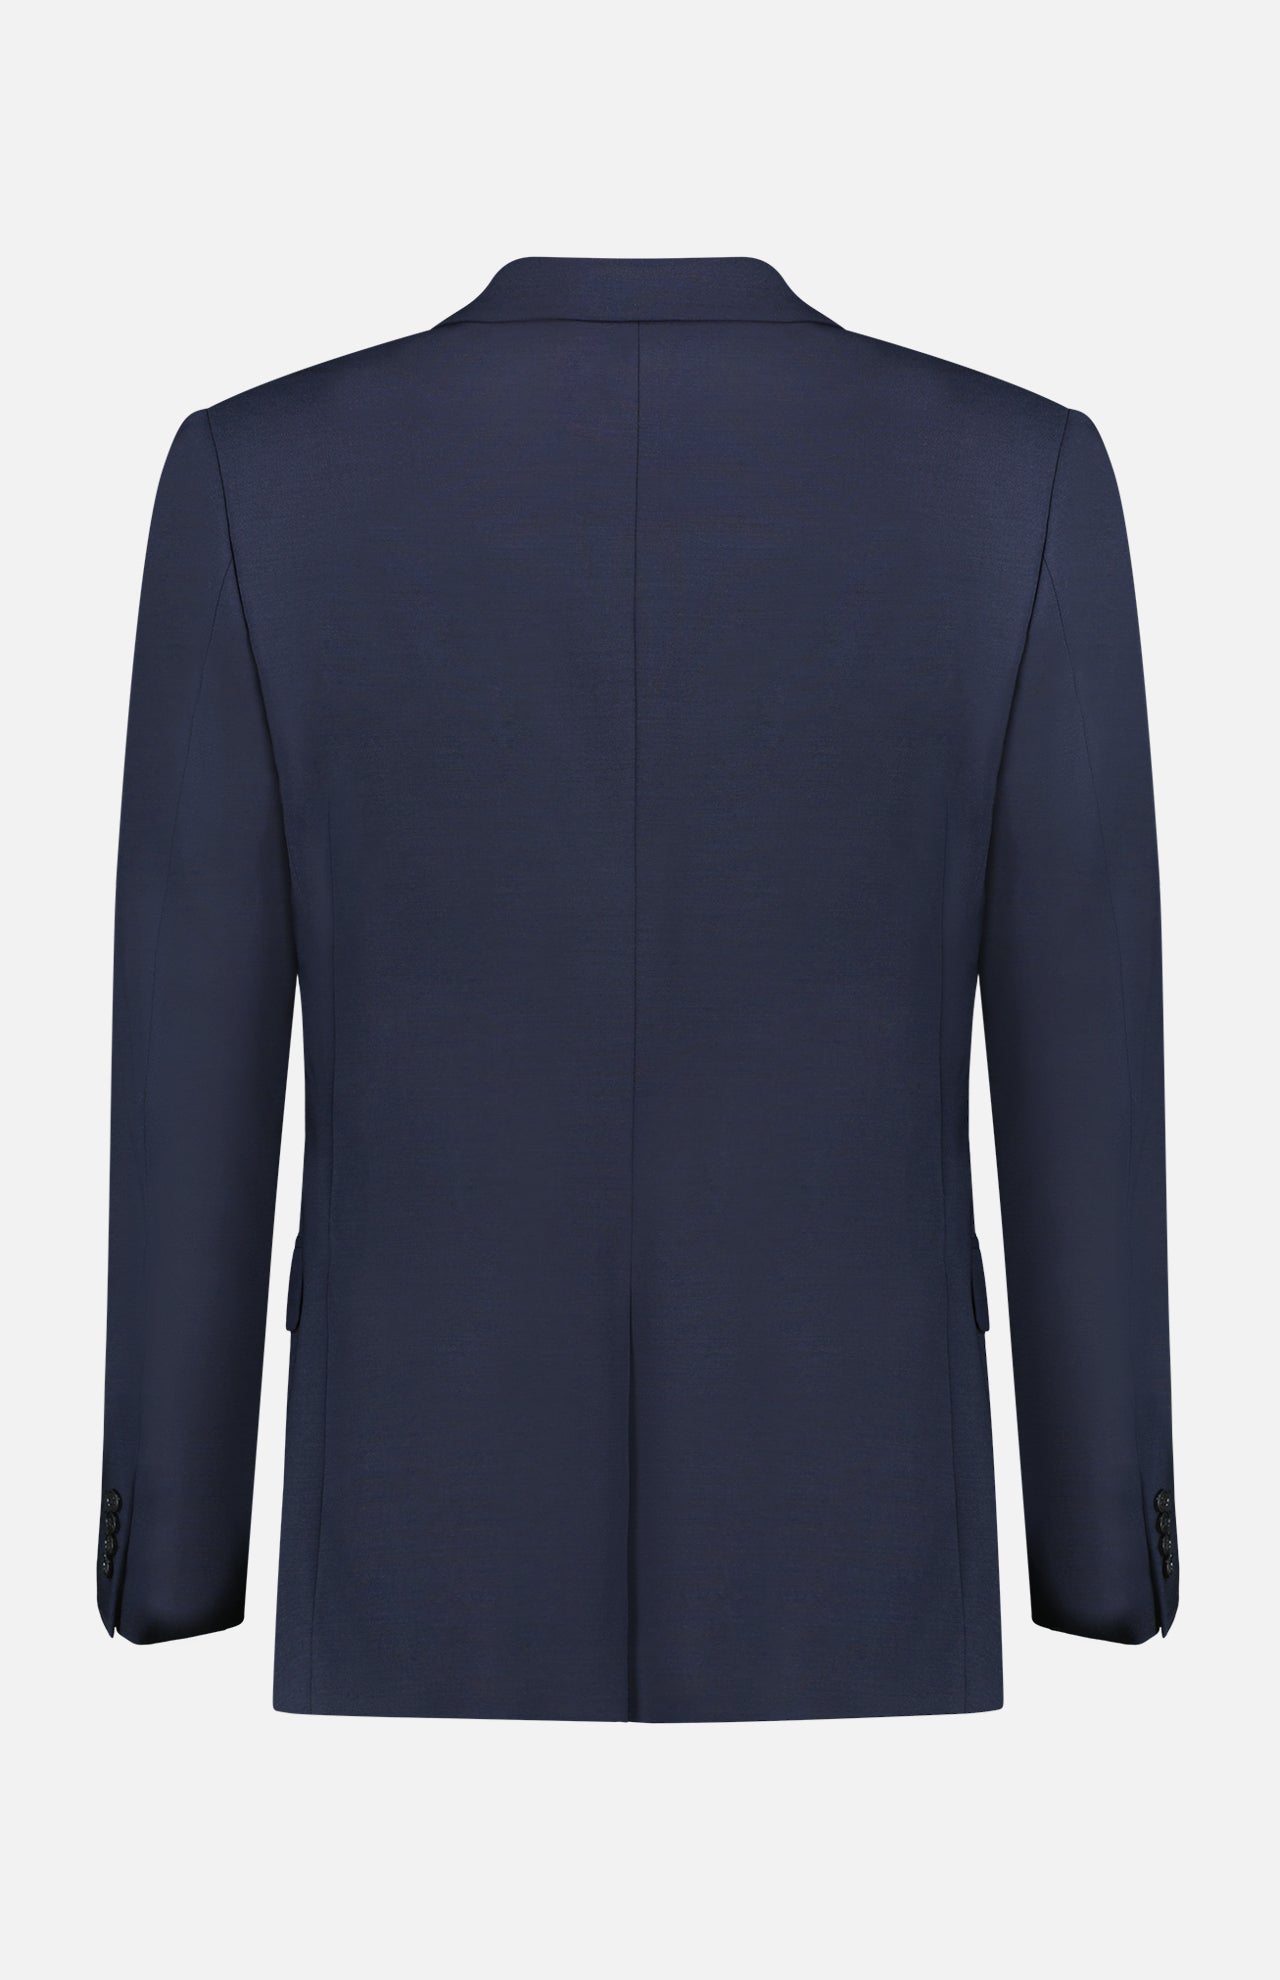 Chambers New Tailor 2 Suit Jacket (1737077162099)